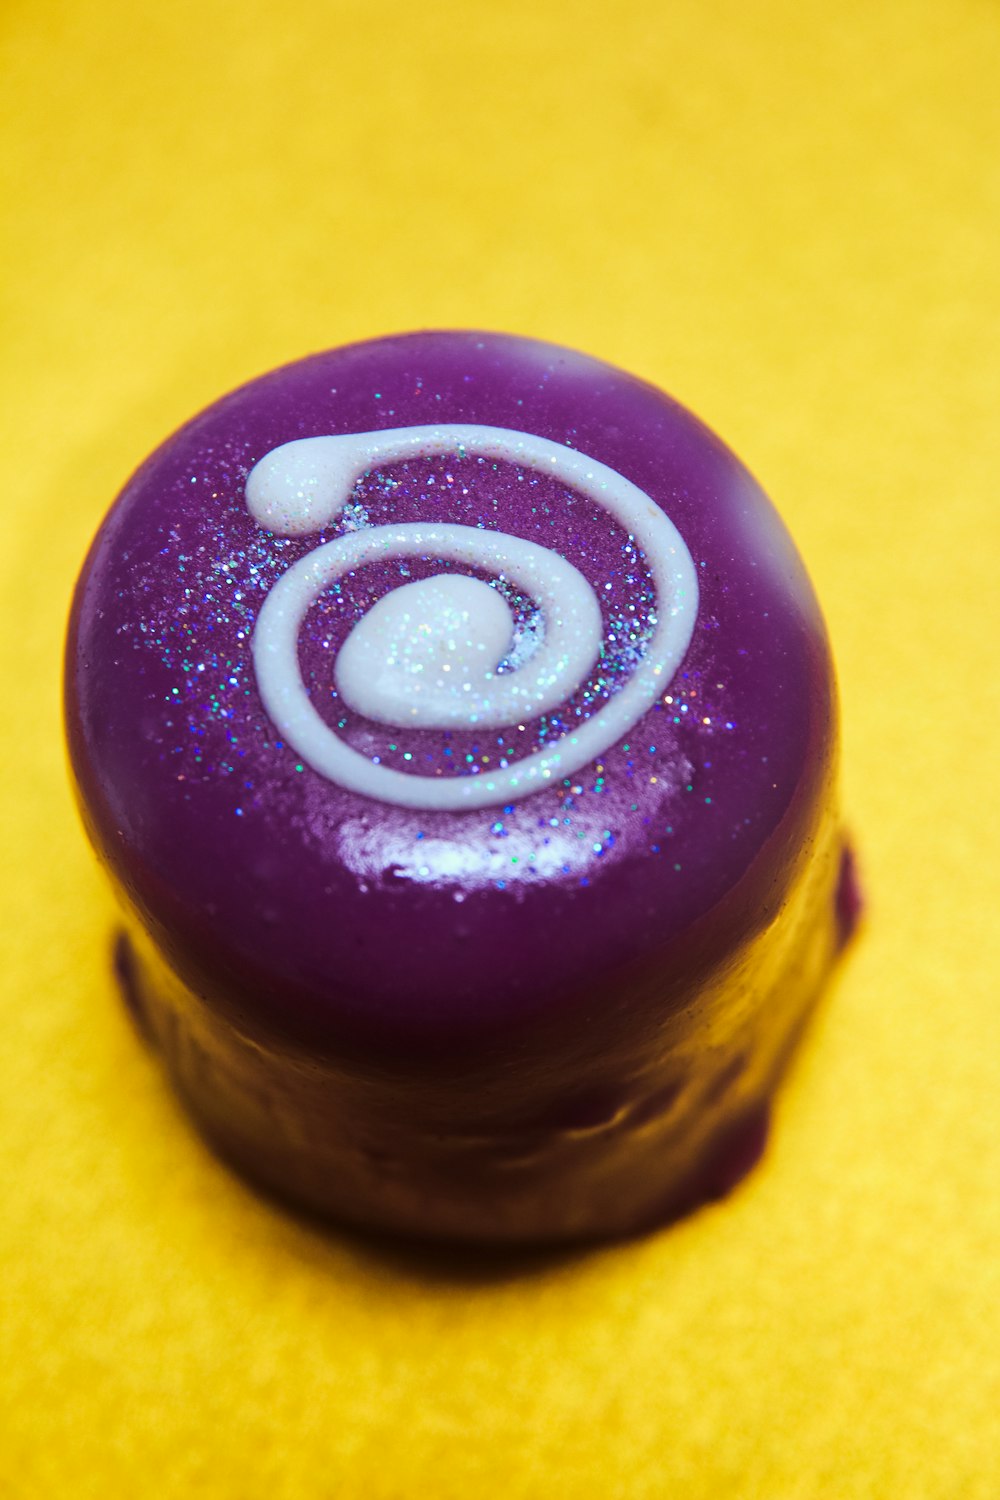 a close up of a purple object on a yellow surface